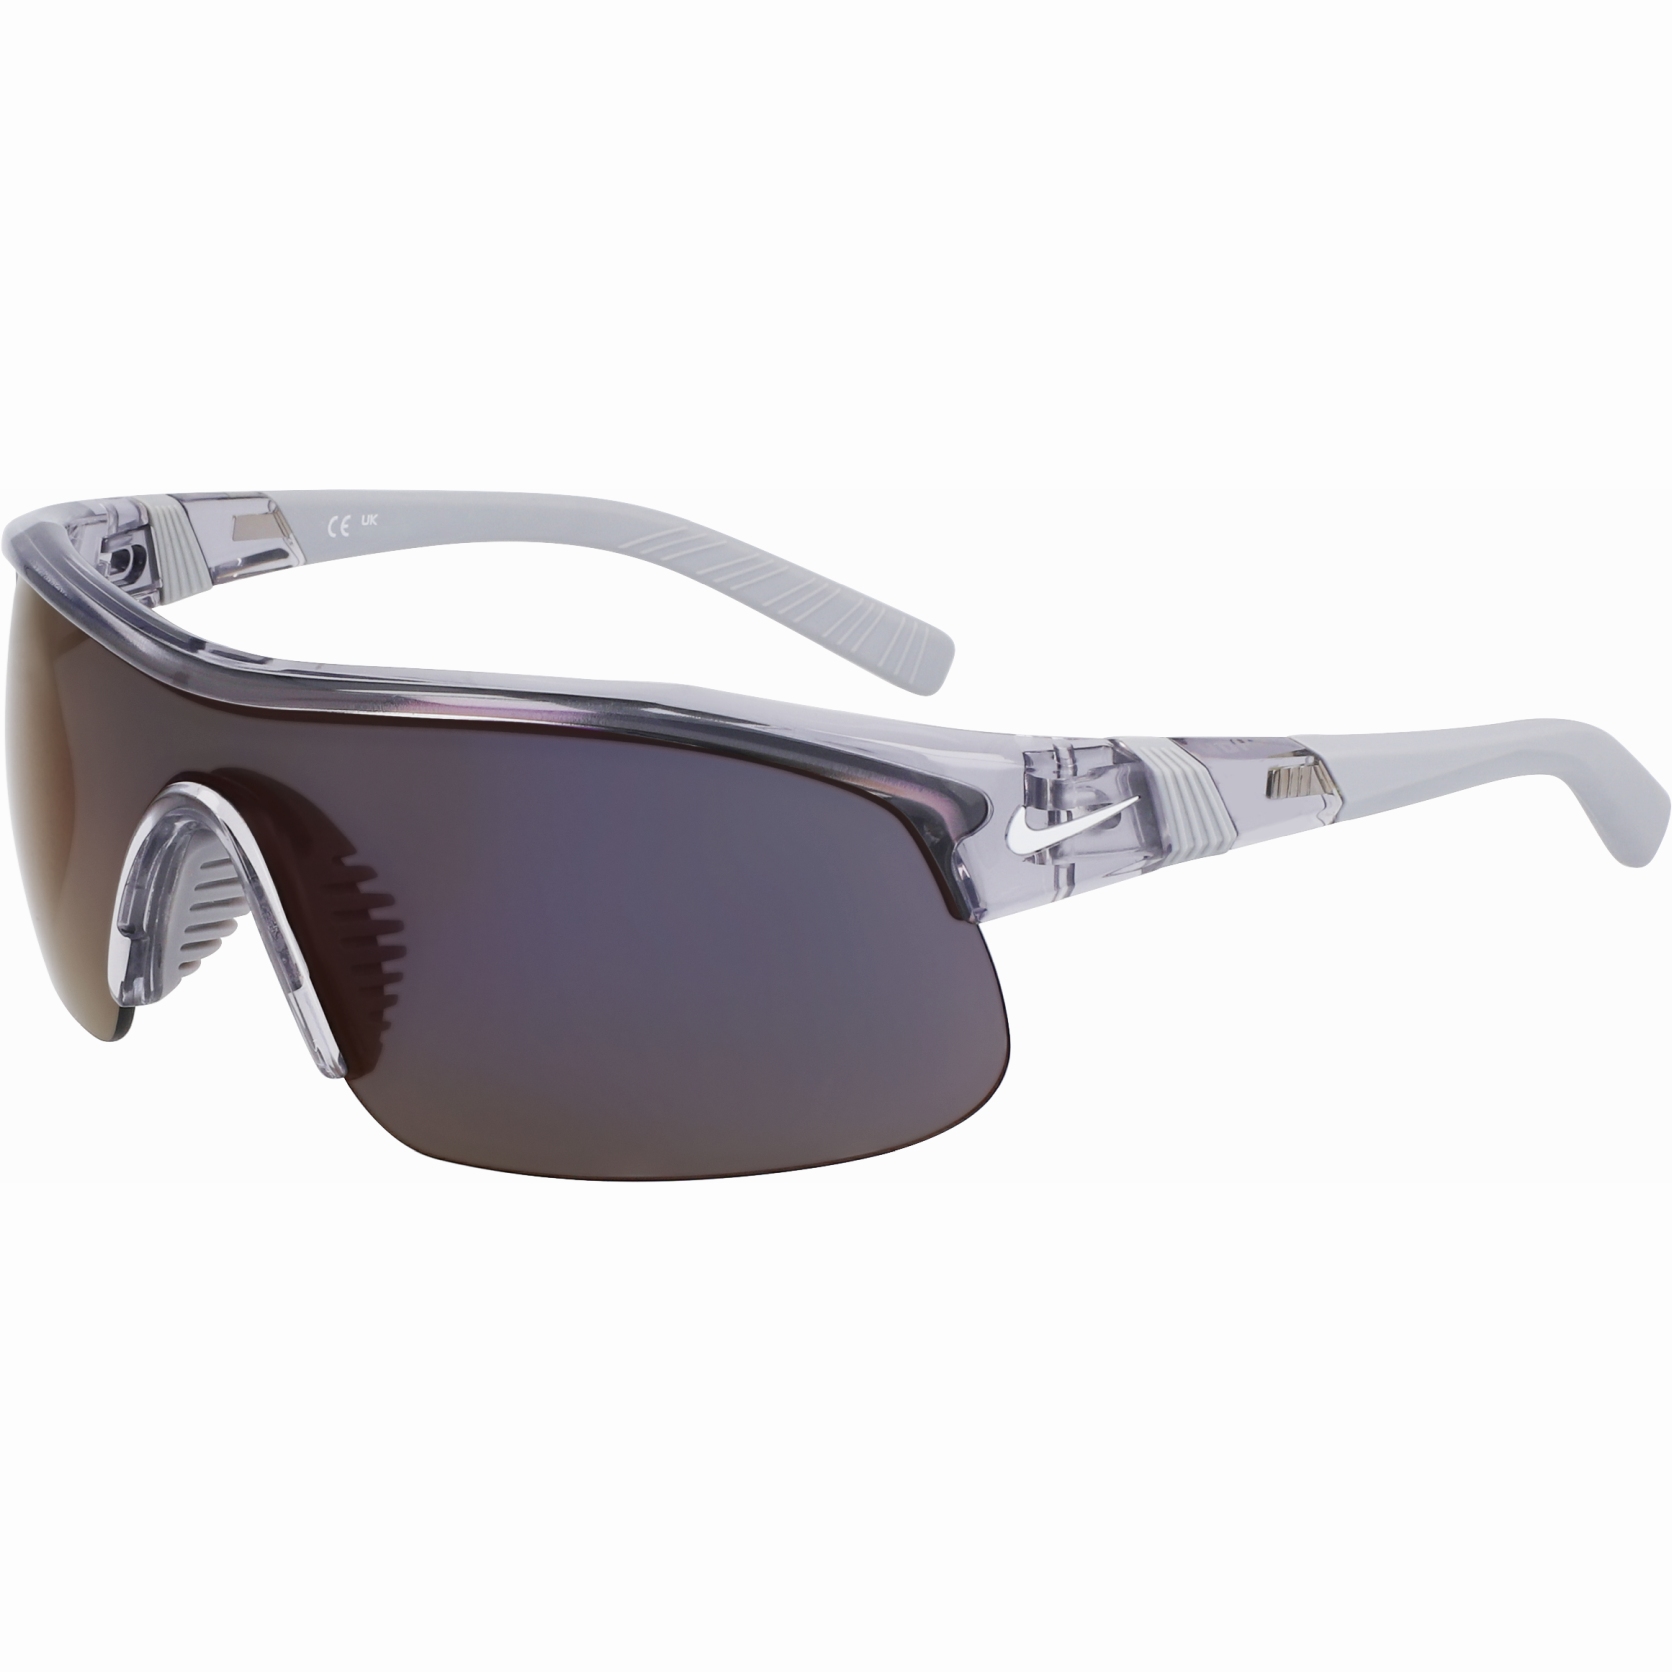 Picture of Nike Show X1 Sun Glasses - shiny wolf grey | blue mirror lens 5818065